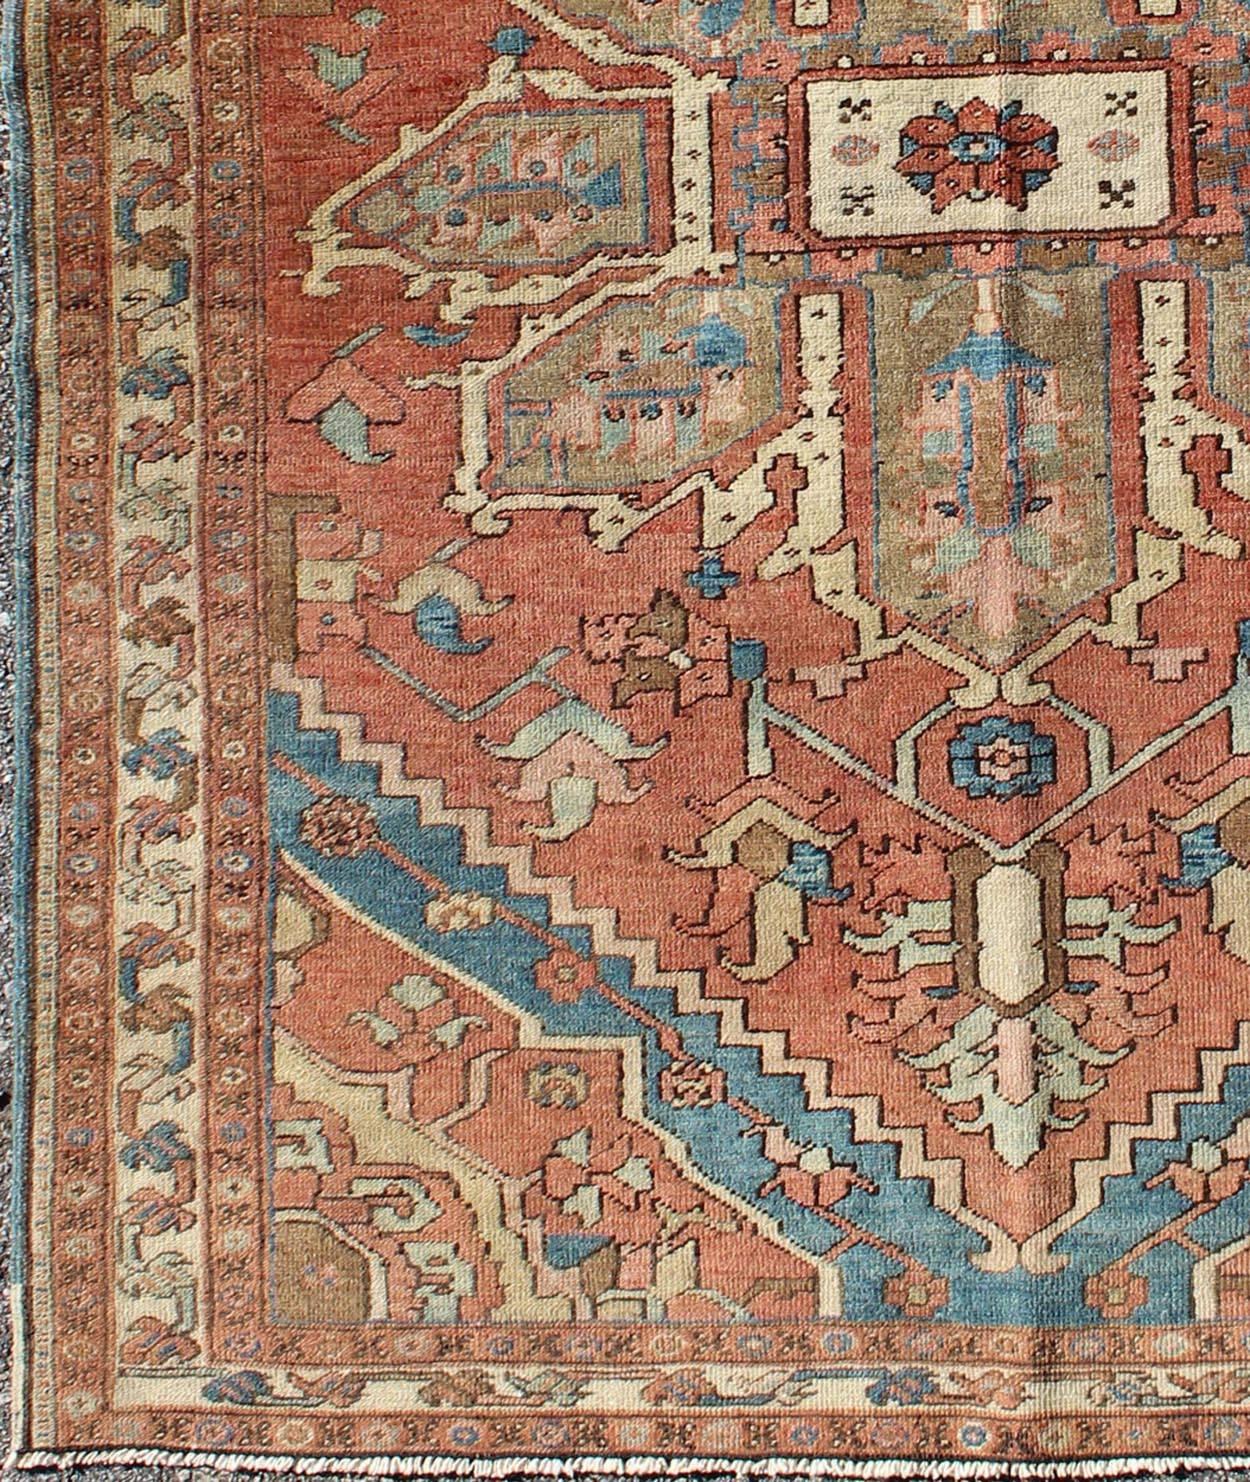 This lovely antique Persian Serapi rug was woven in the early 20th Century and bears a large, blossoming, geometric central medallion and an overall geometric floral design. The pale tomato red field holds the eight-point palmette-inspired